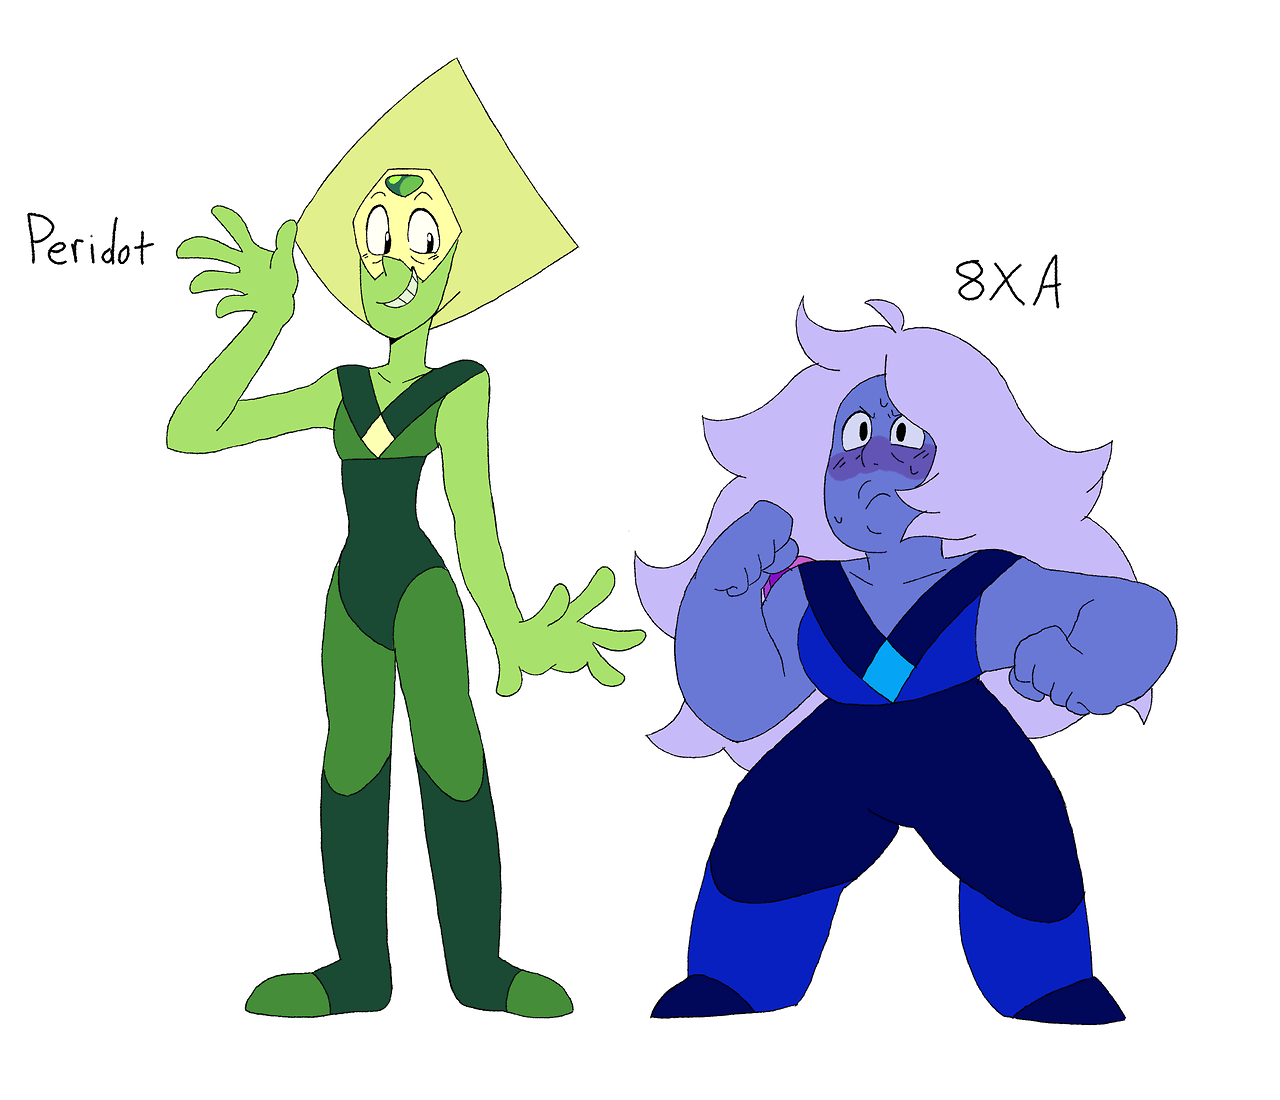 Okay so about peridot being the stalker instead…….(idk if I’m going to do anything